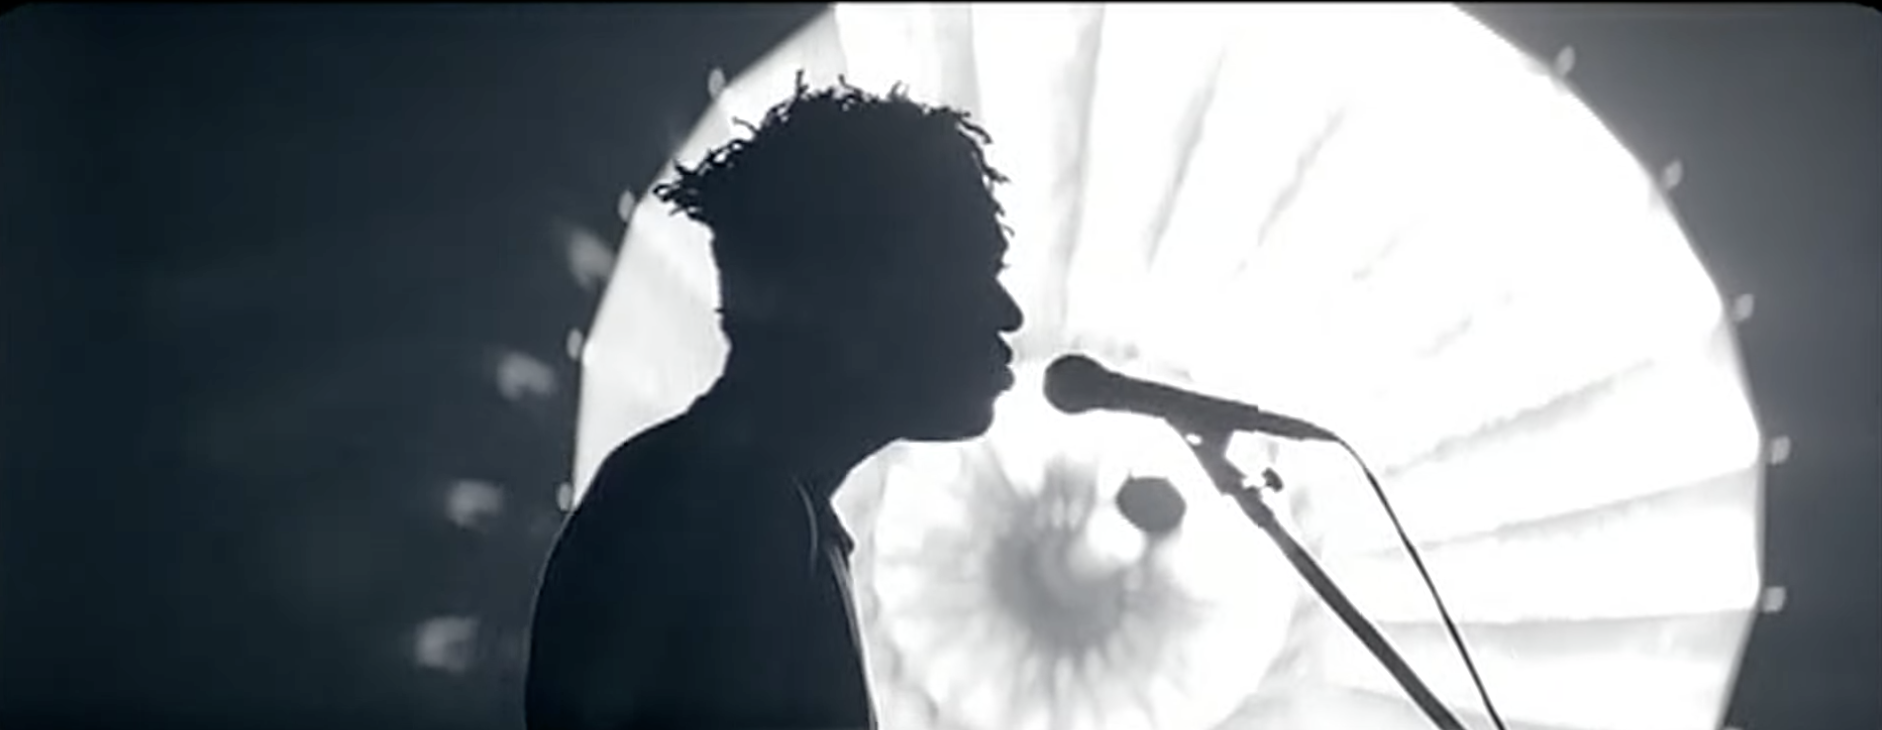 Music video screenshot: Two more years from Bloc Party